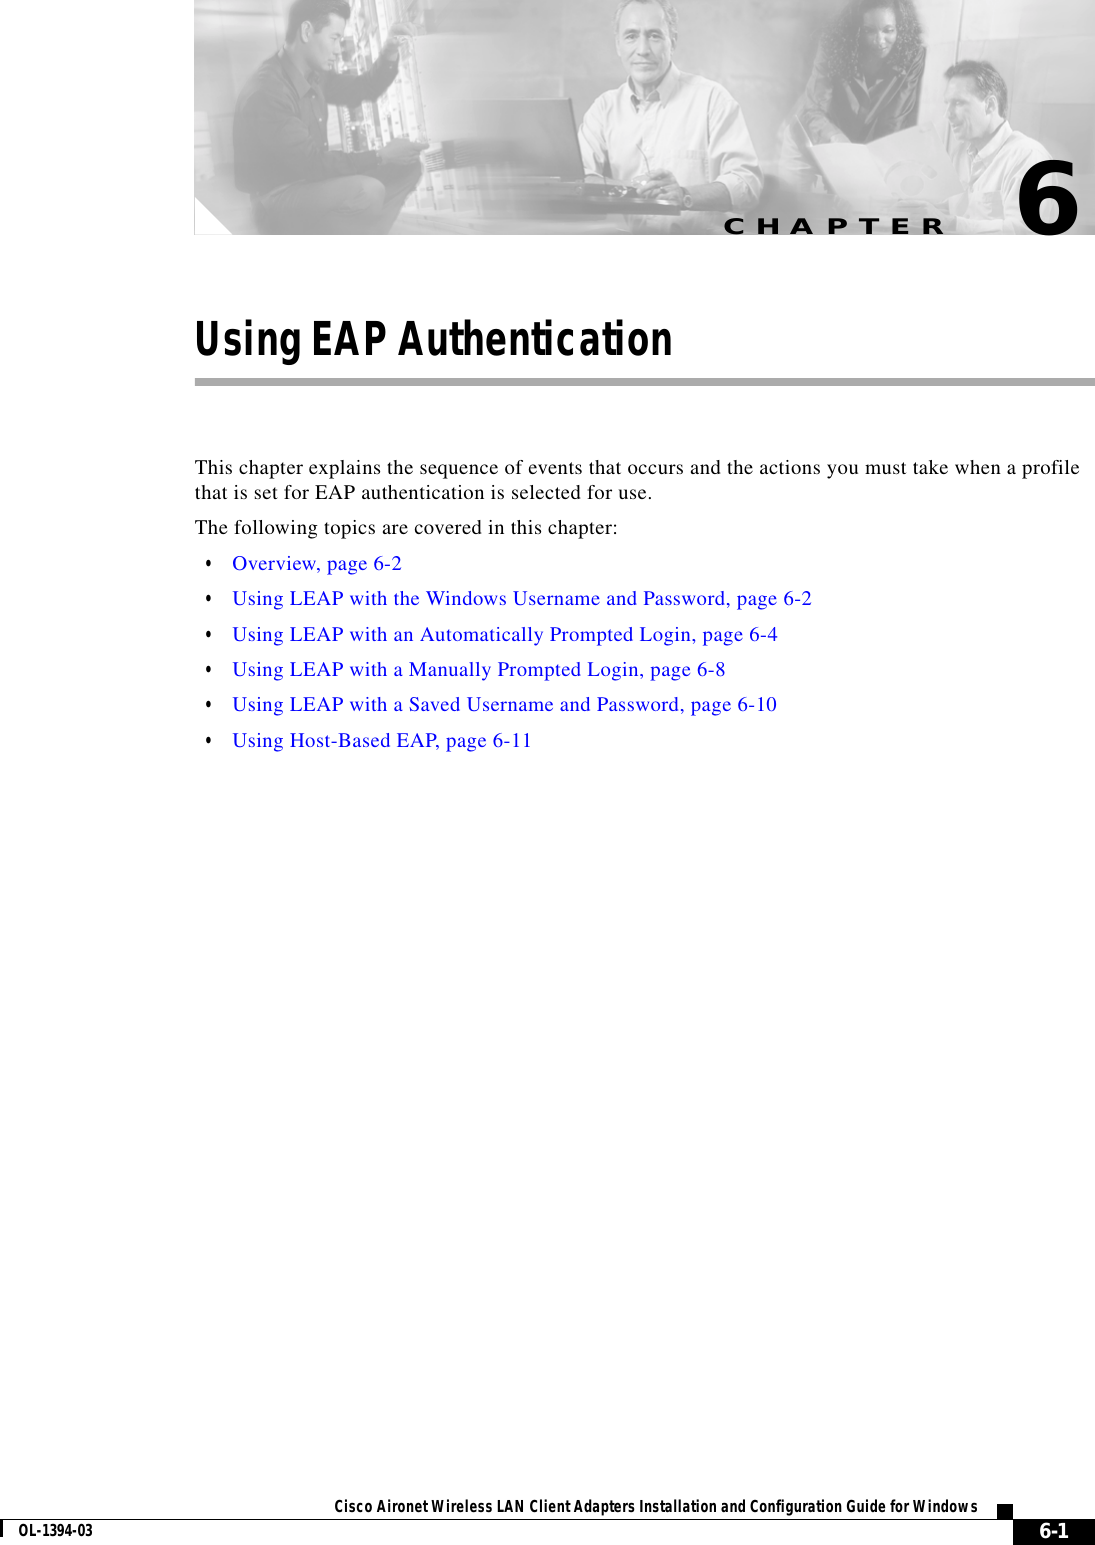 CHAPTER6-1Cisco Aironet Wireless LAN Client Adapters Installation and Configuration Guide for WindowsOL-1394-036Using EAP AuthenticationThis chapter explains the sequence of events that occurs and the actions you must take when a profile that is set for EAP authentication is selected for use.The following topics are covered in this chapter:•Overview, page 6-2•Using LEAP with the Windows Username and Password, page 6-2•Using LEAP with an Automatically Prompted Login, page 6-4•Using LEAP with a Manually Prompted Login, page 6-8•Using LEAP with a Saved Username and Password, page 6-10•Using Host-Based EAP, page 6-11